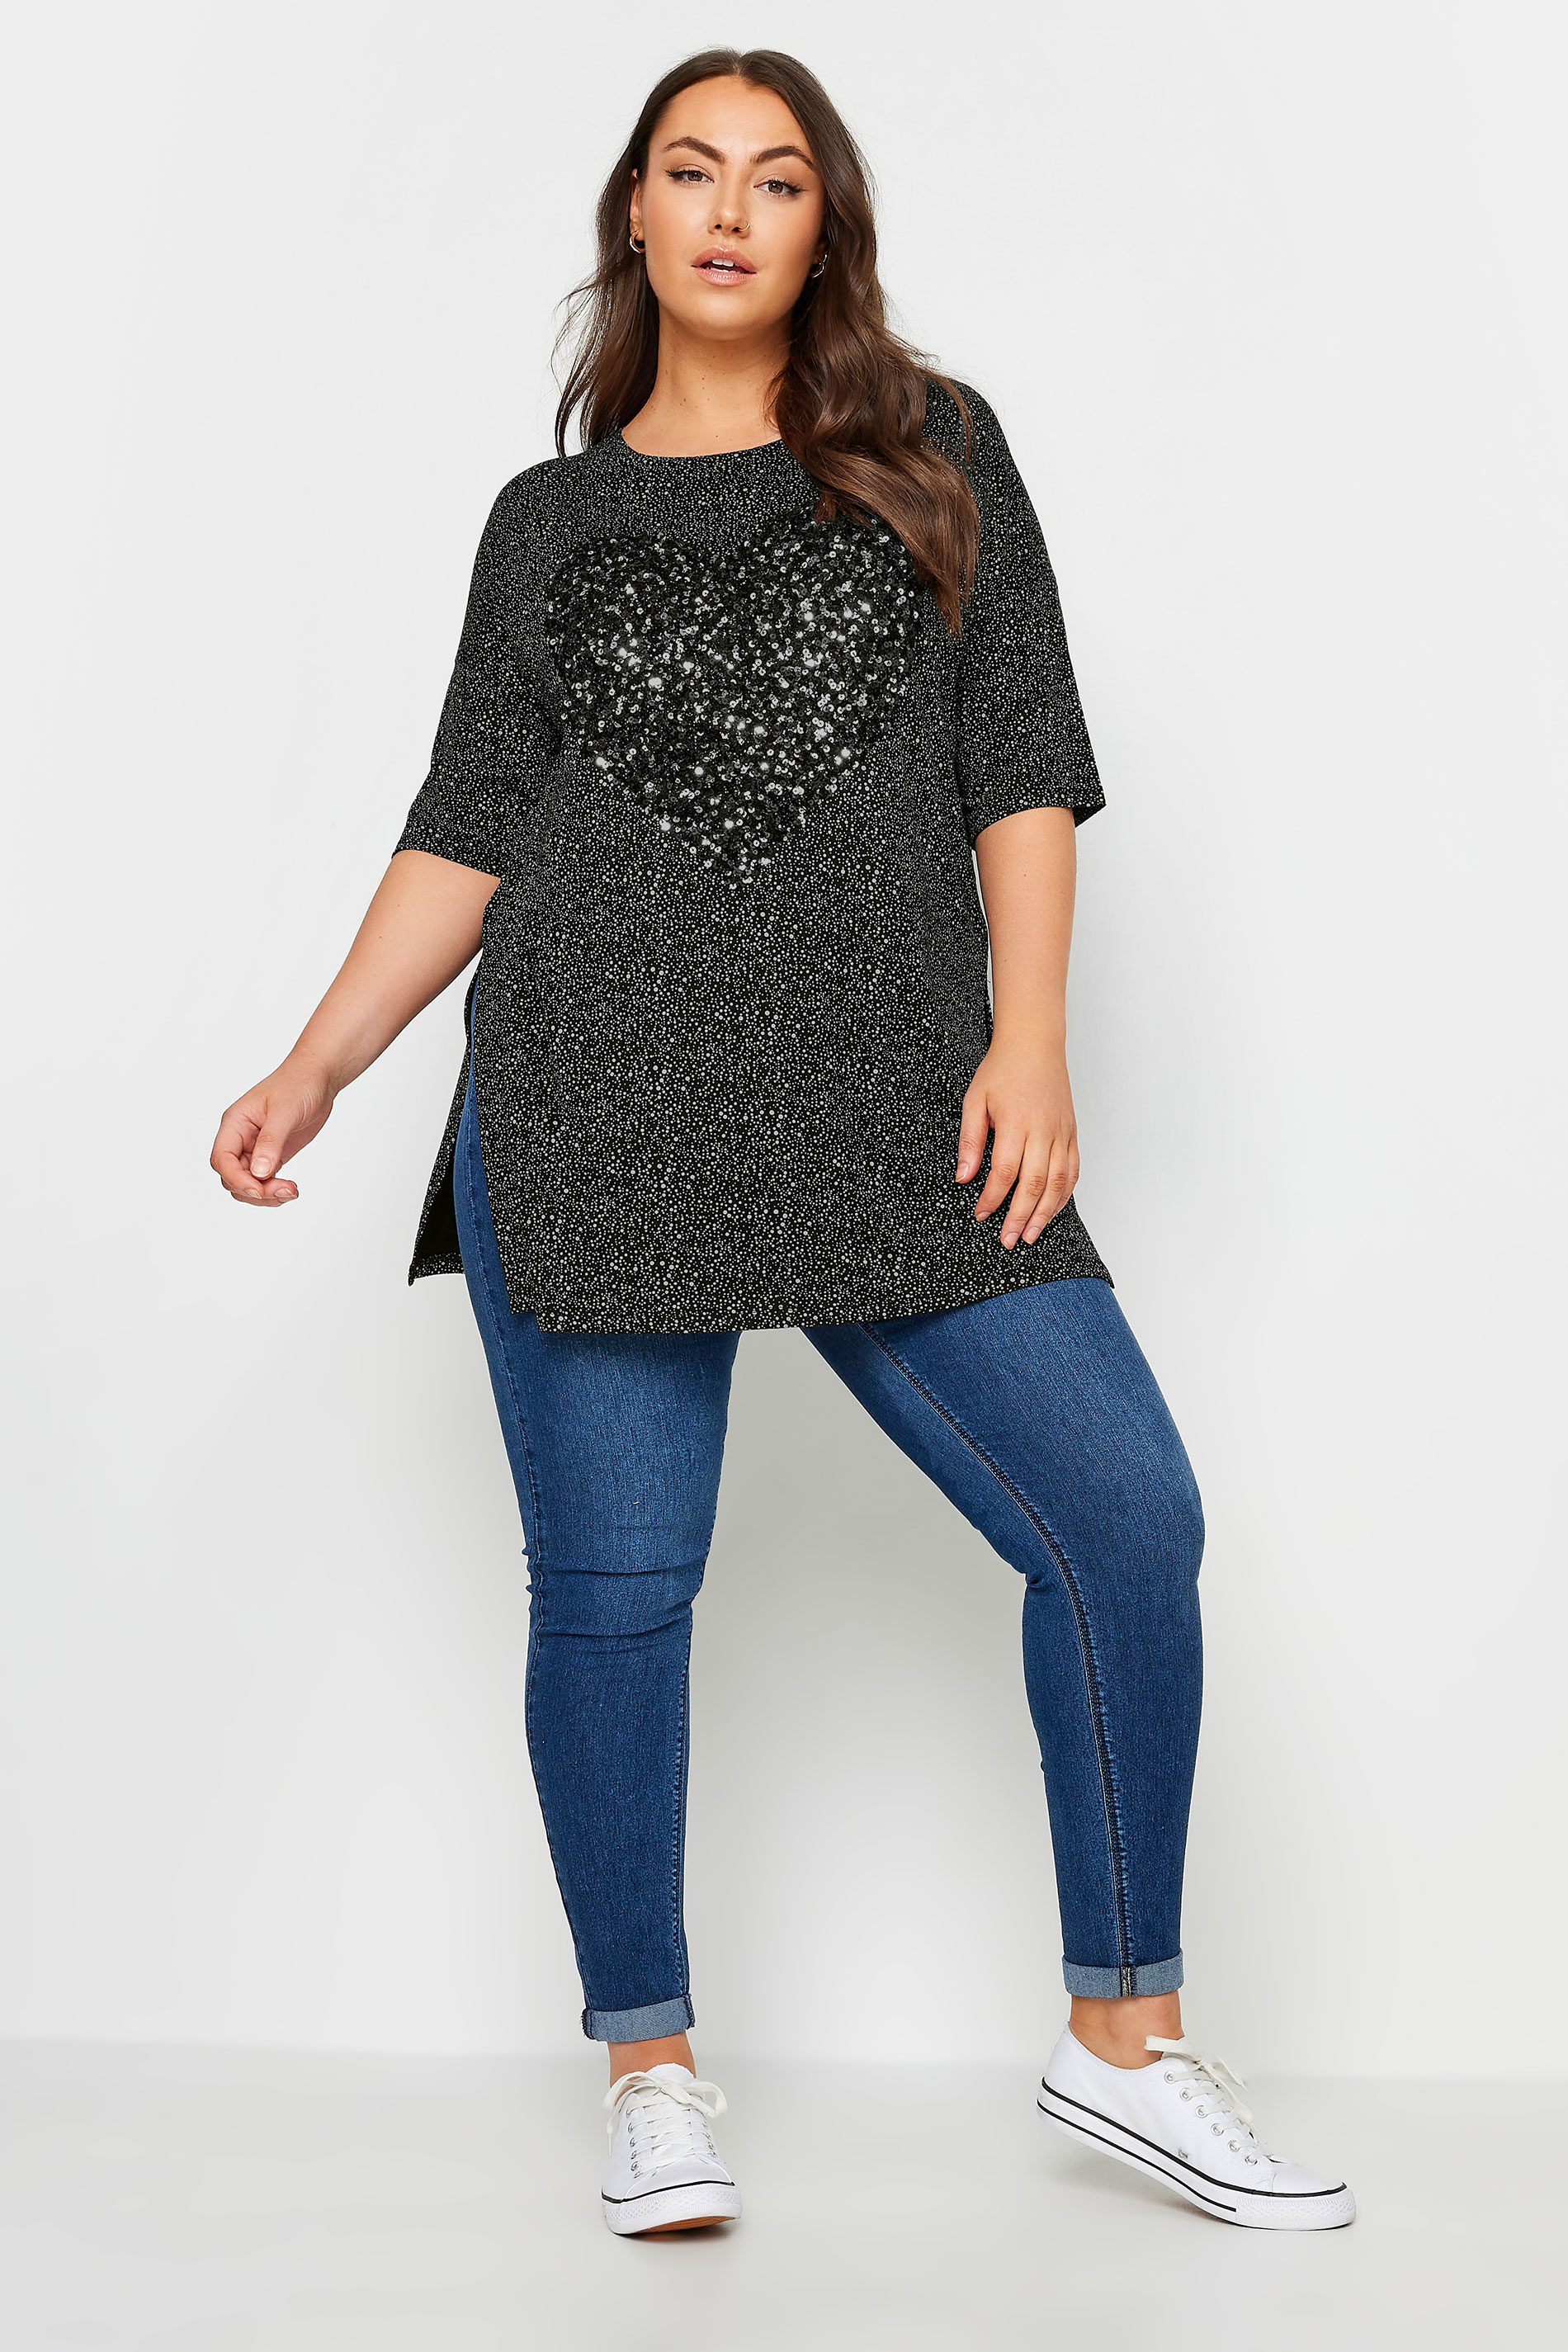 YOURS Plus Size Black Heart Sequin Embellished Top | Yours Clothing 2